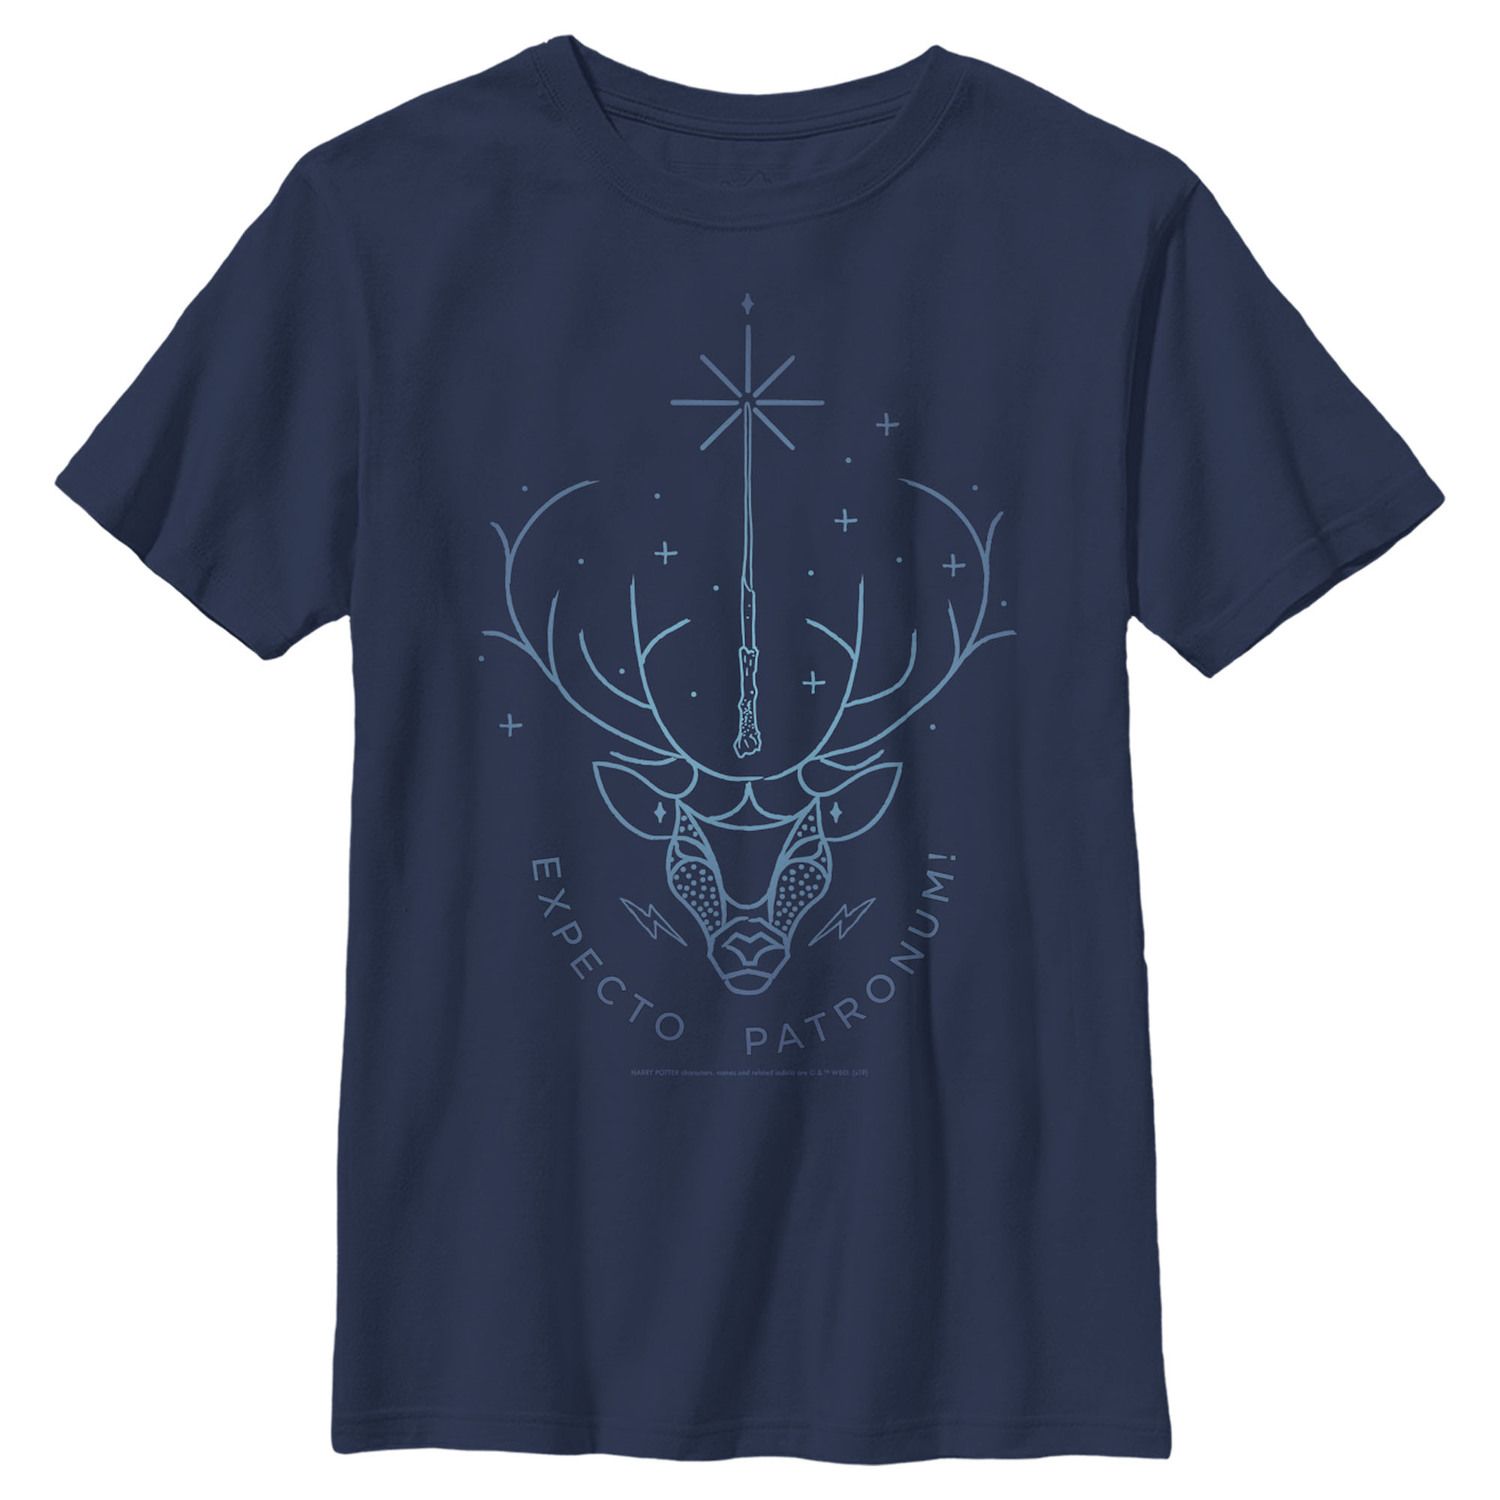 Image for Harry Potter Boys 8-20 Expecto Patronum Graphic Tee at Kohl's.